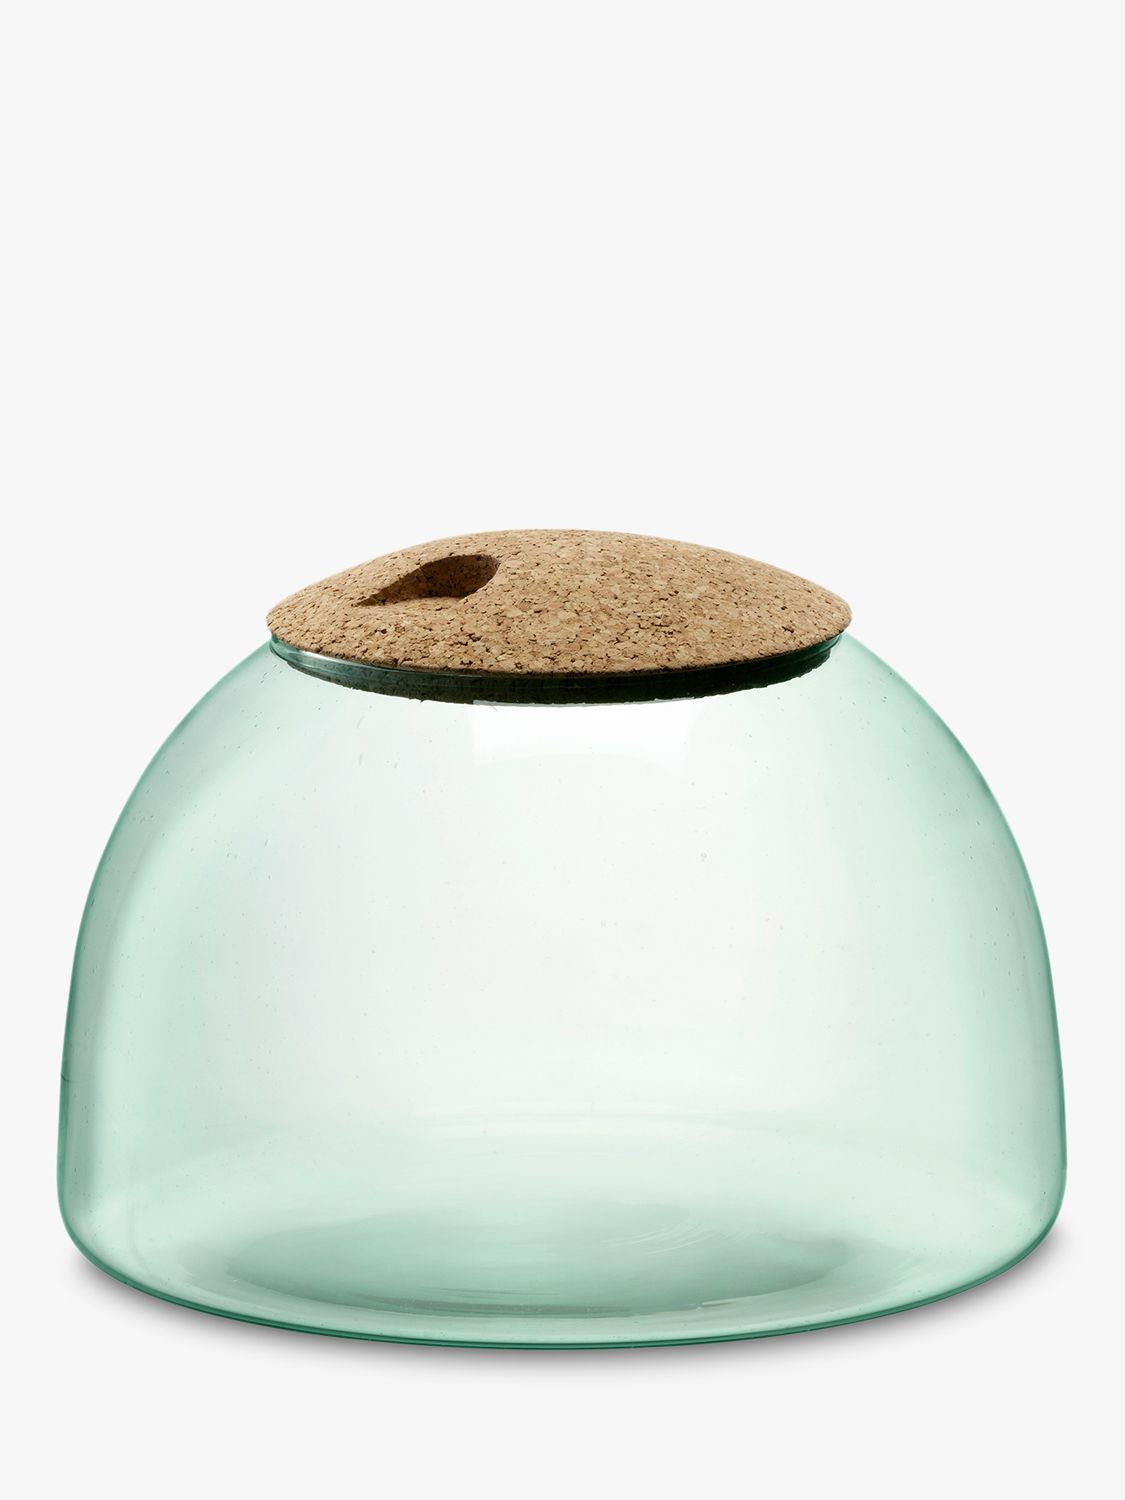 LSA International Canopy Recycled Glass Terrarium with Cork Lid